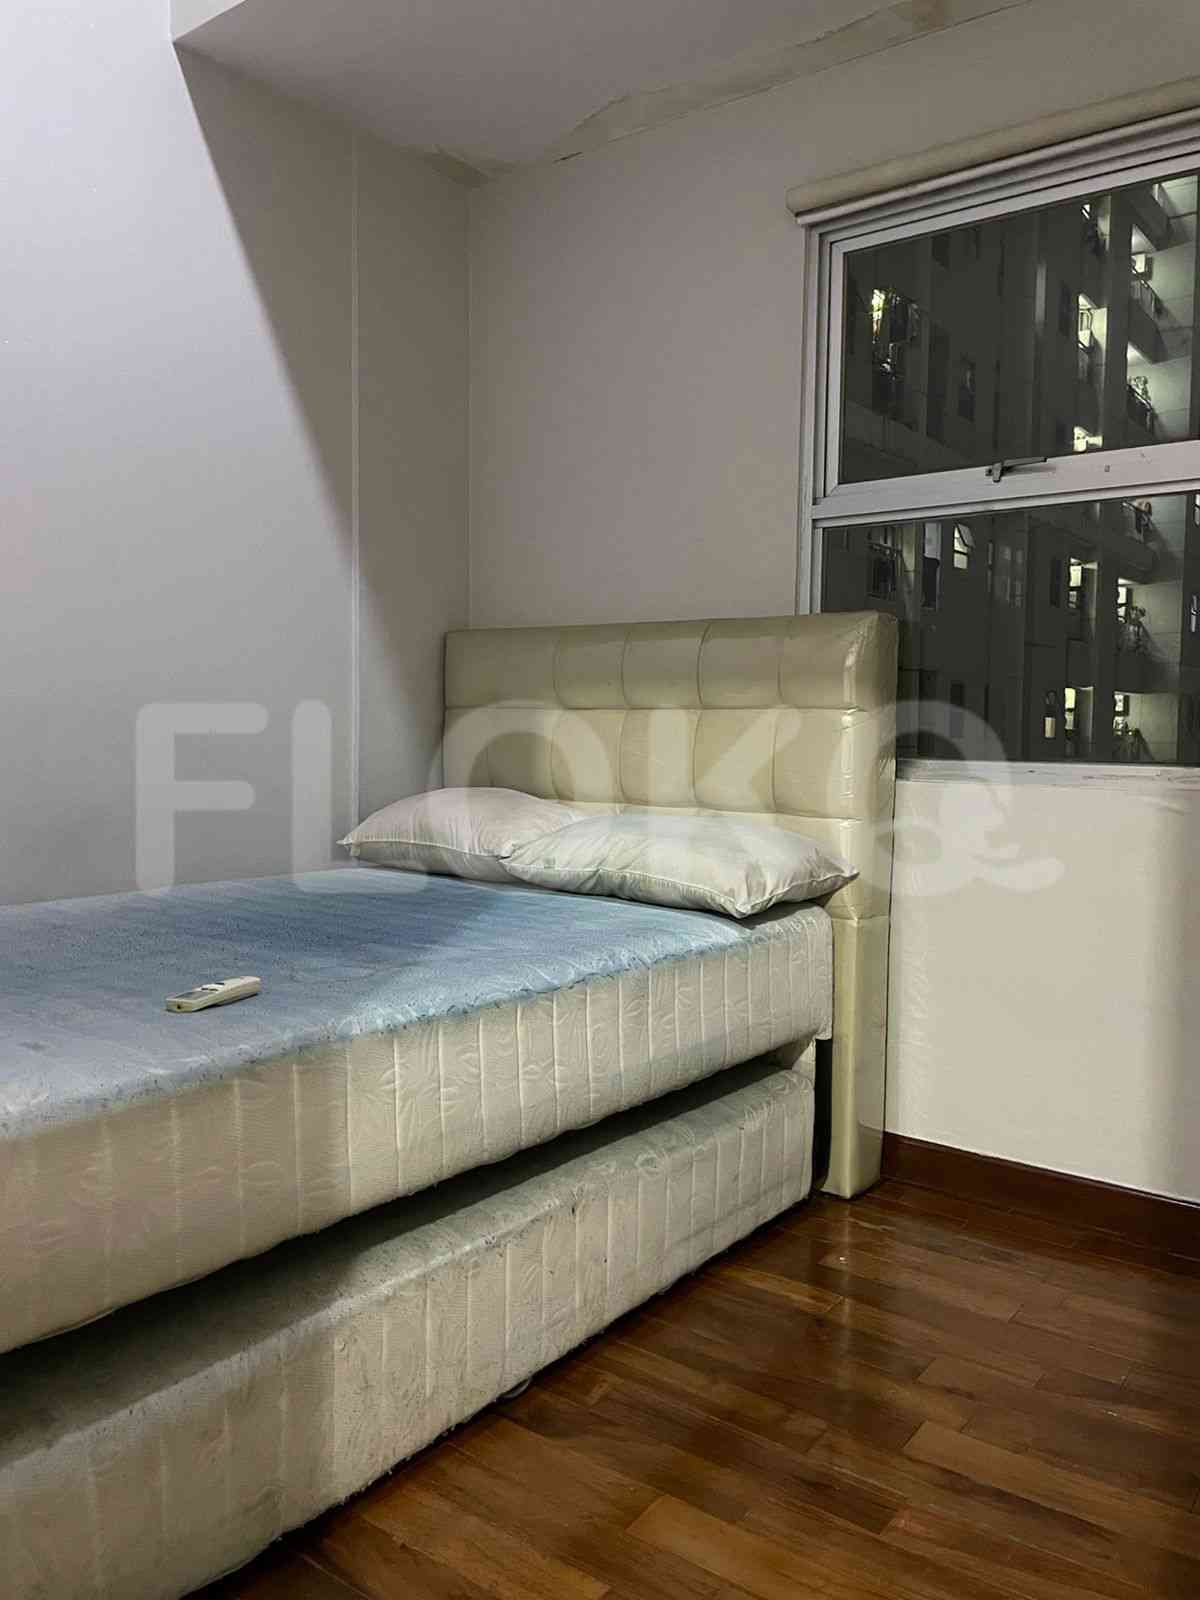 2 Bedroom on 18th Floor for Rent in Seasons City Apartment - fgr682 2